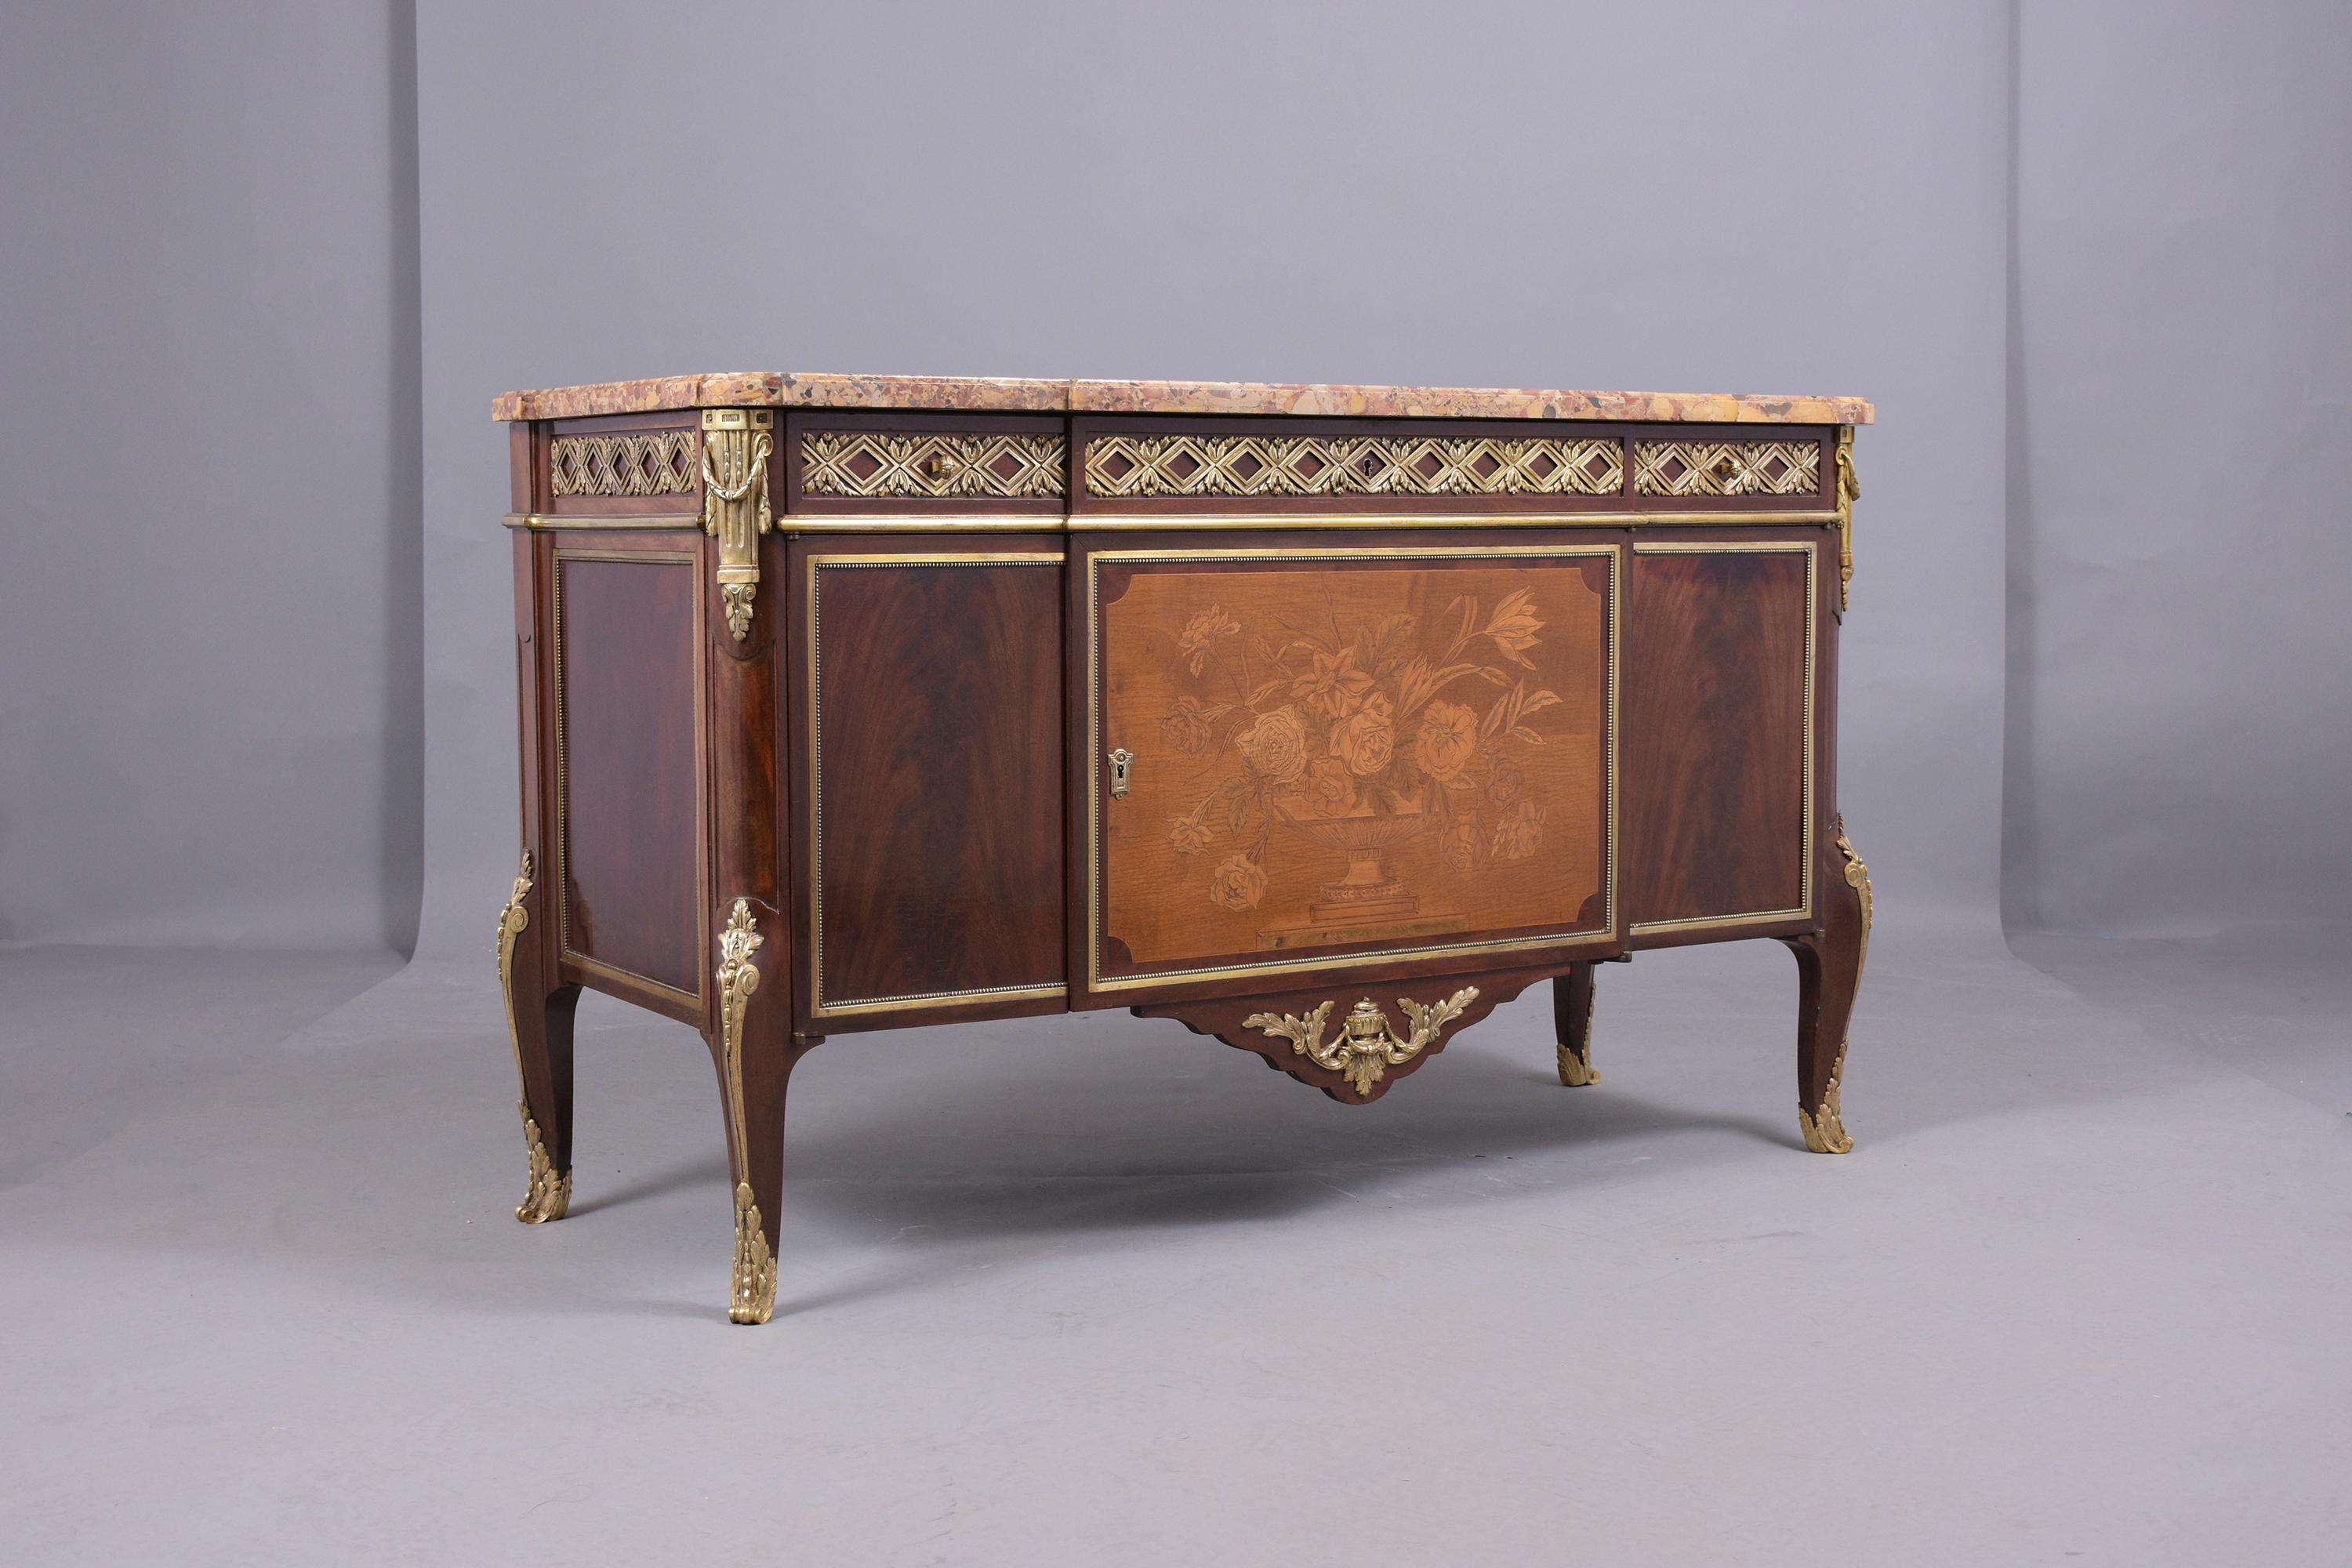 19th-Century French Louis XVI Buffet: Antique Mahogany and Bronze Marquetry Comm 6